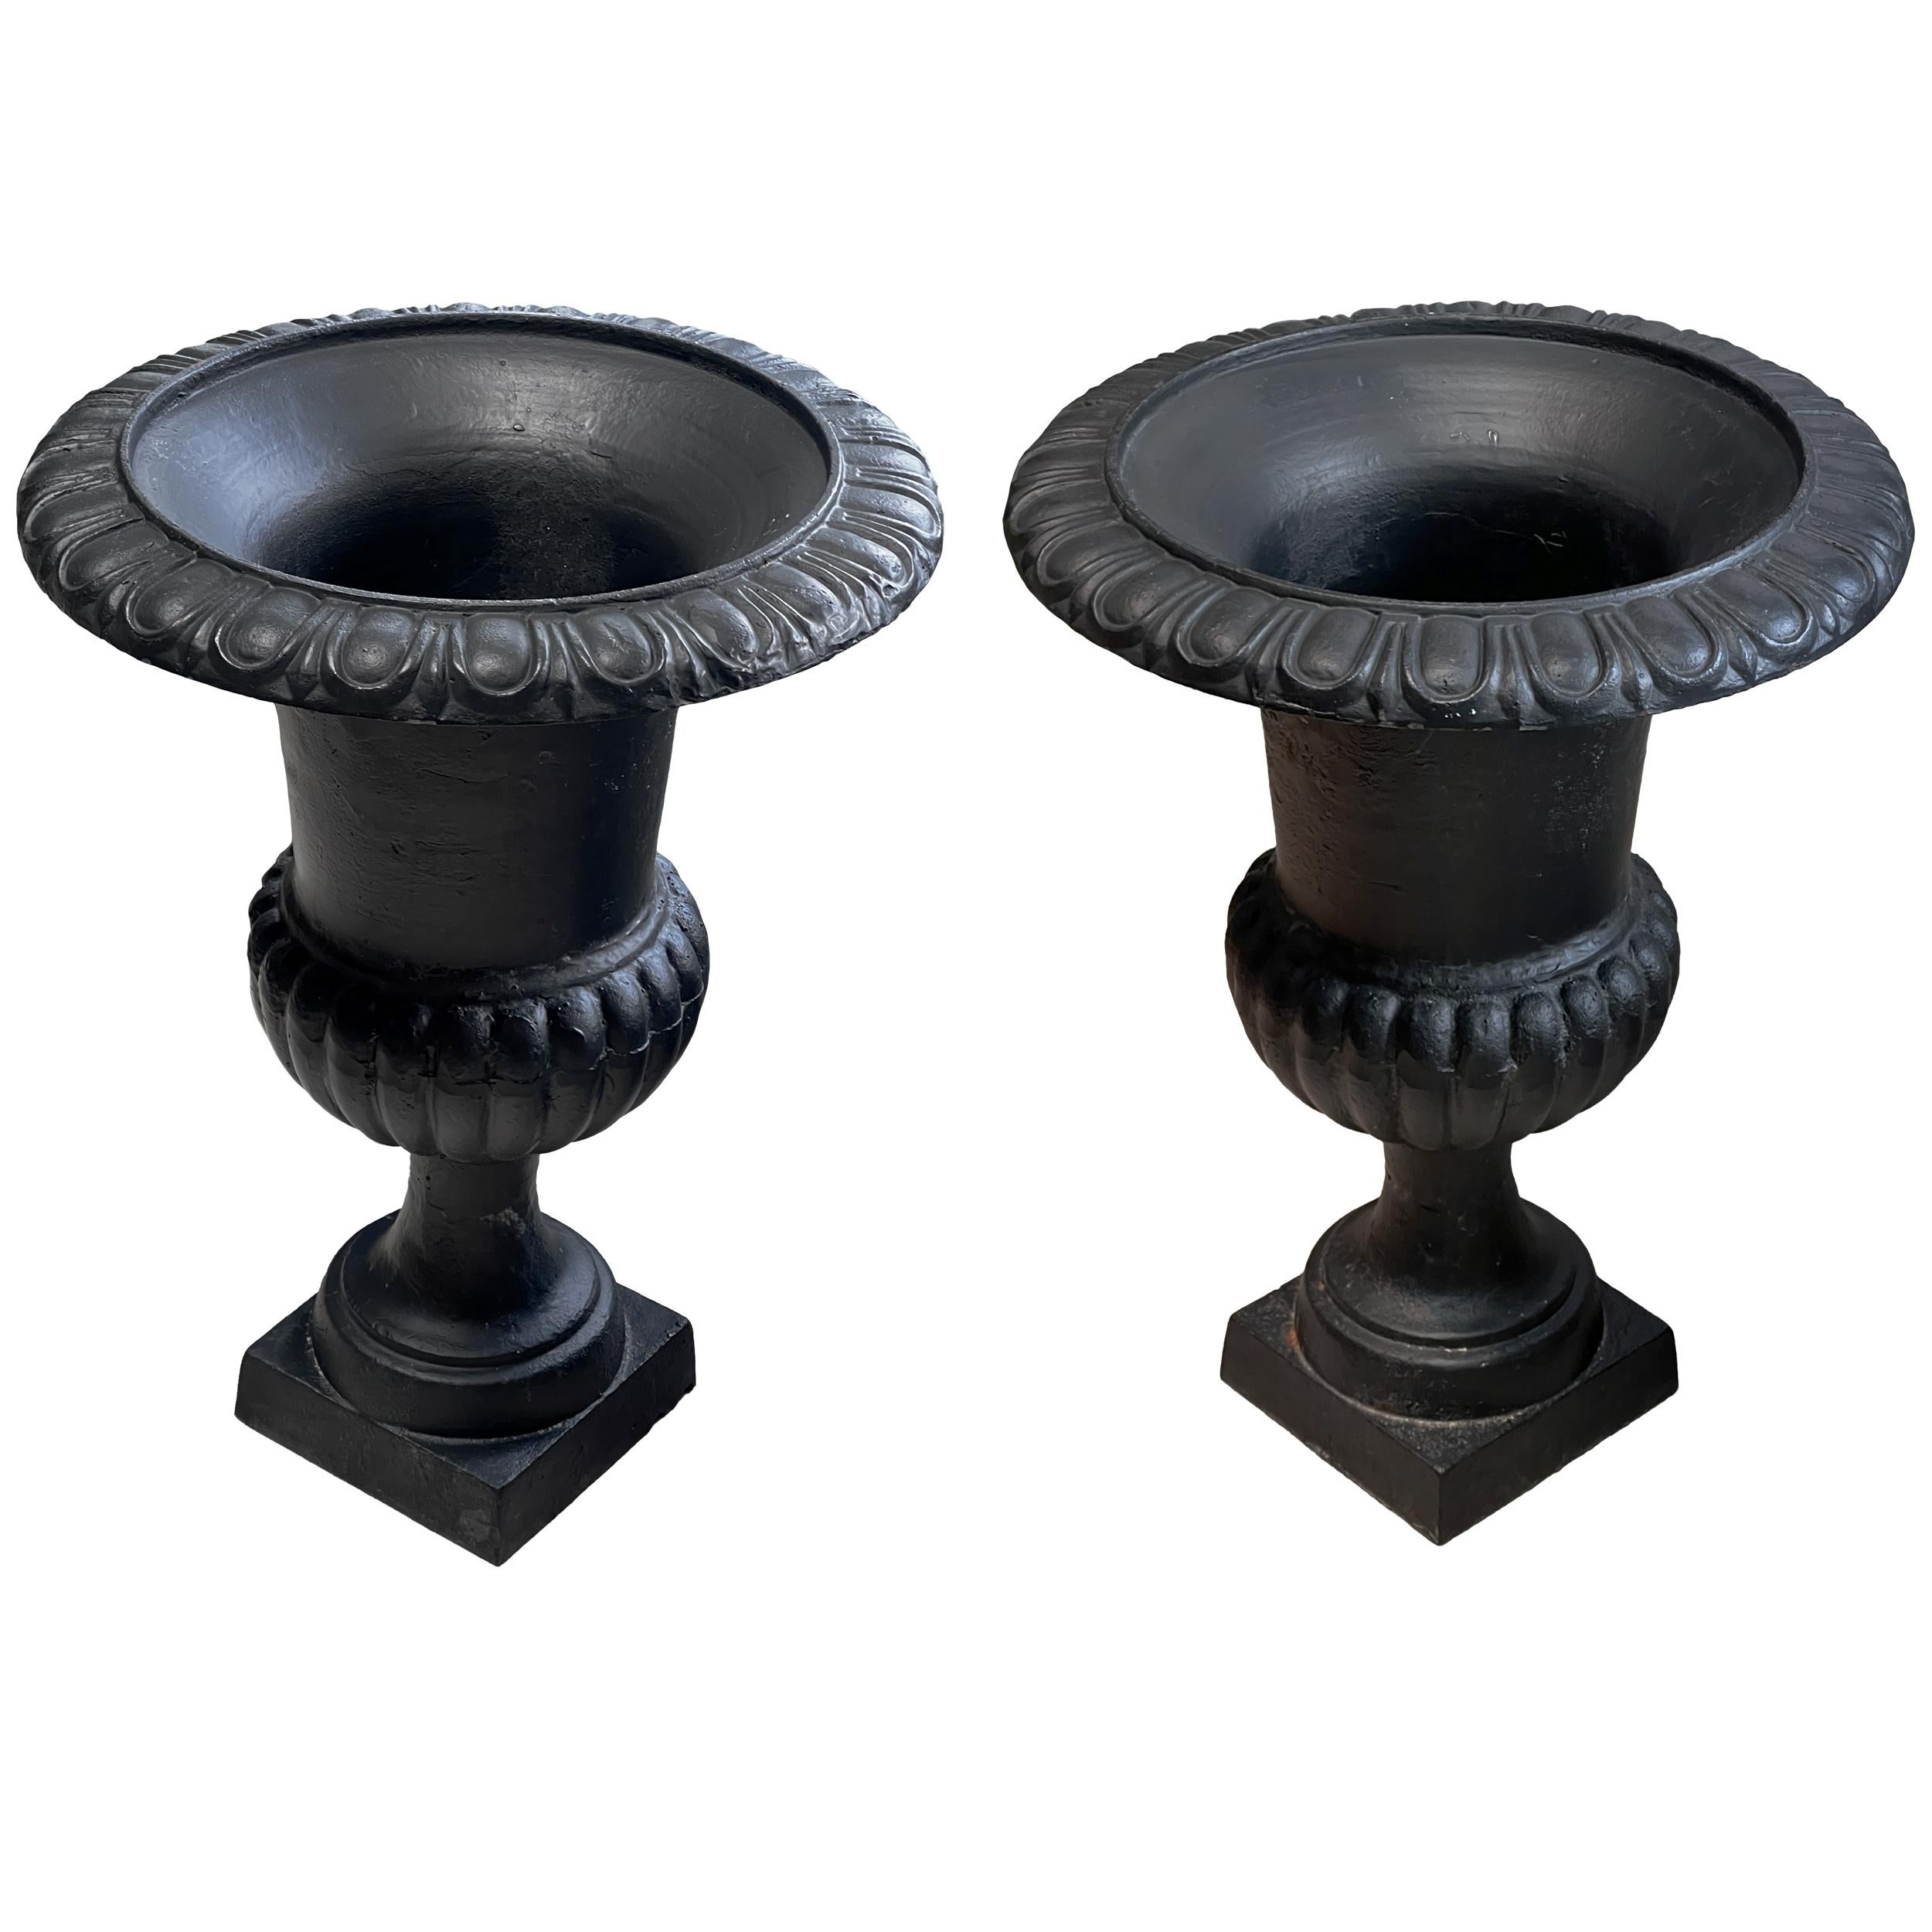 Pair of elegant vintage French Neoclassical-style cast iron urns or planters dating back to the early 20th century. These exquisite jardinières feature a sturdy construction with a delightful black coat with natural iron patina, perfect for a